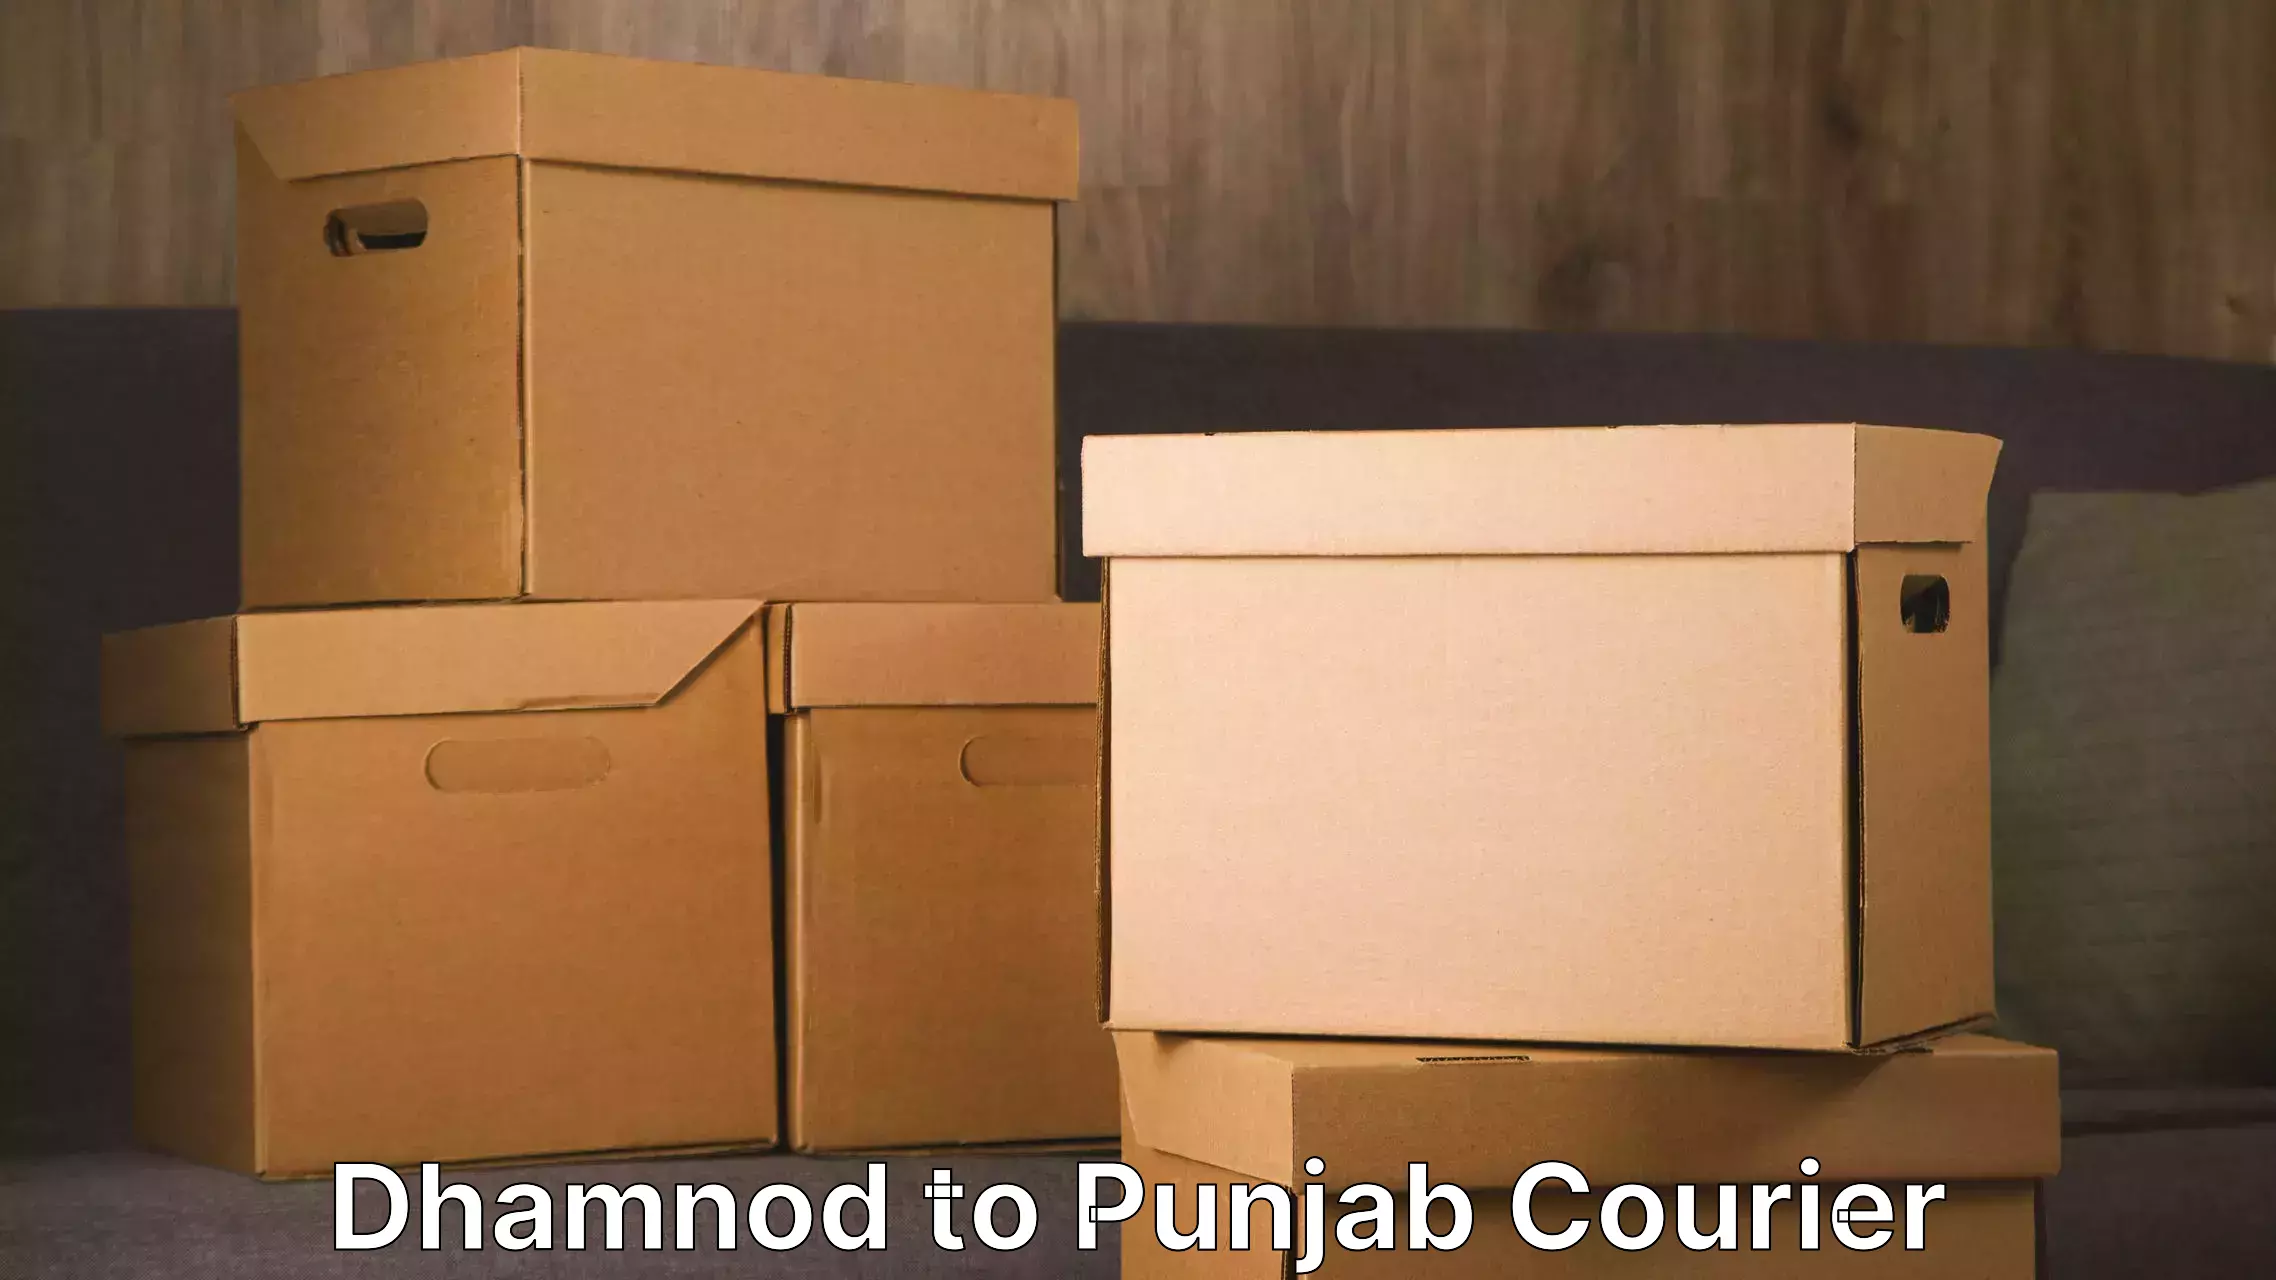 Moving service excellence Dhamnod to Punjab